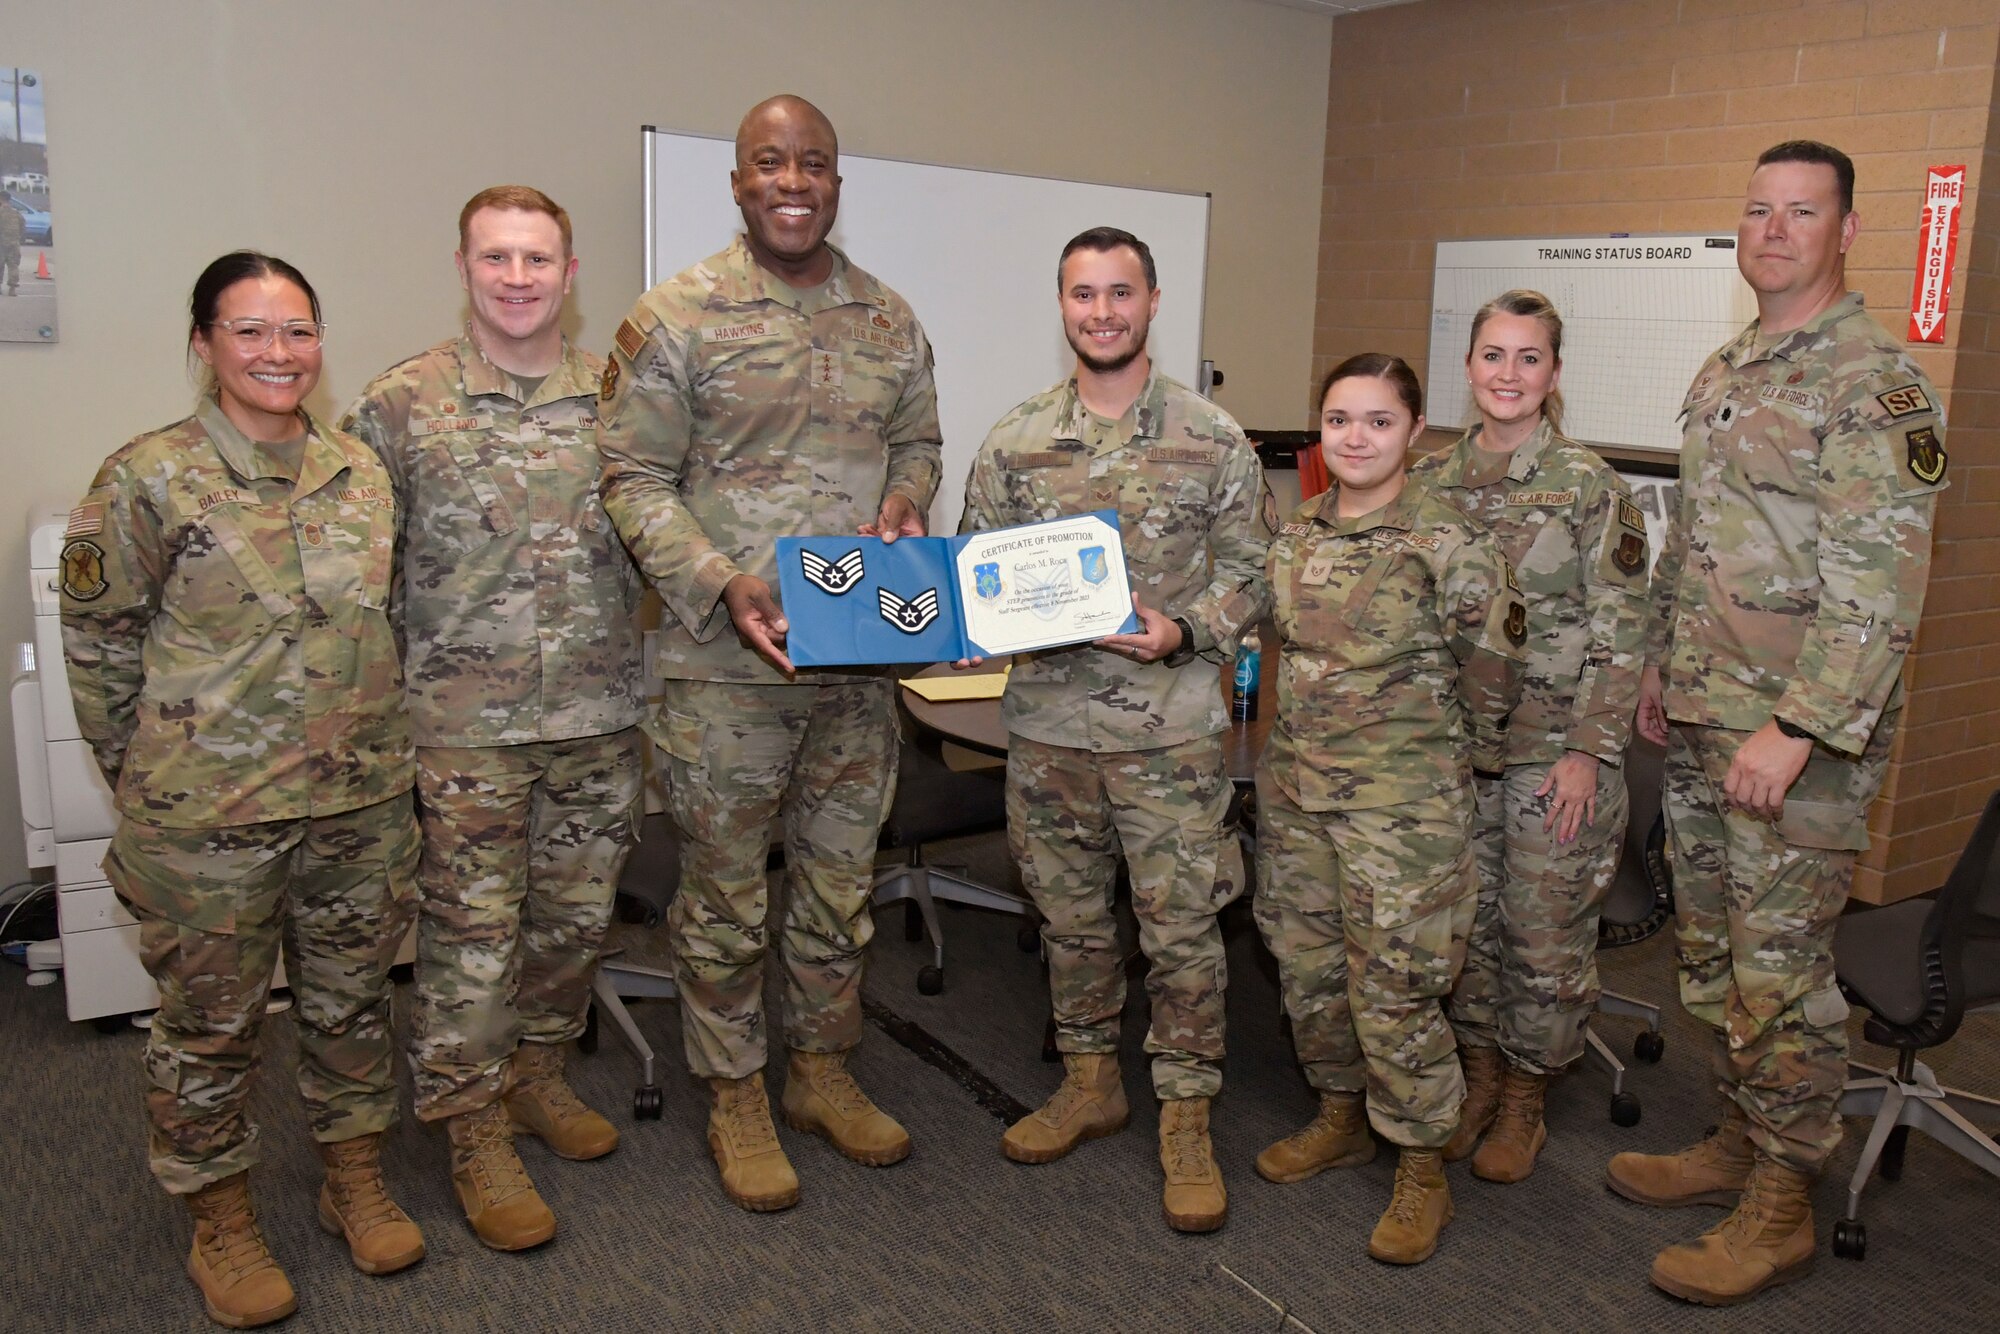 Lt. Gen. Hawkins and Staff Sgt. Roca hold a certificate while posing for a group photo with wing leadership and other members of the squadron.